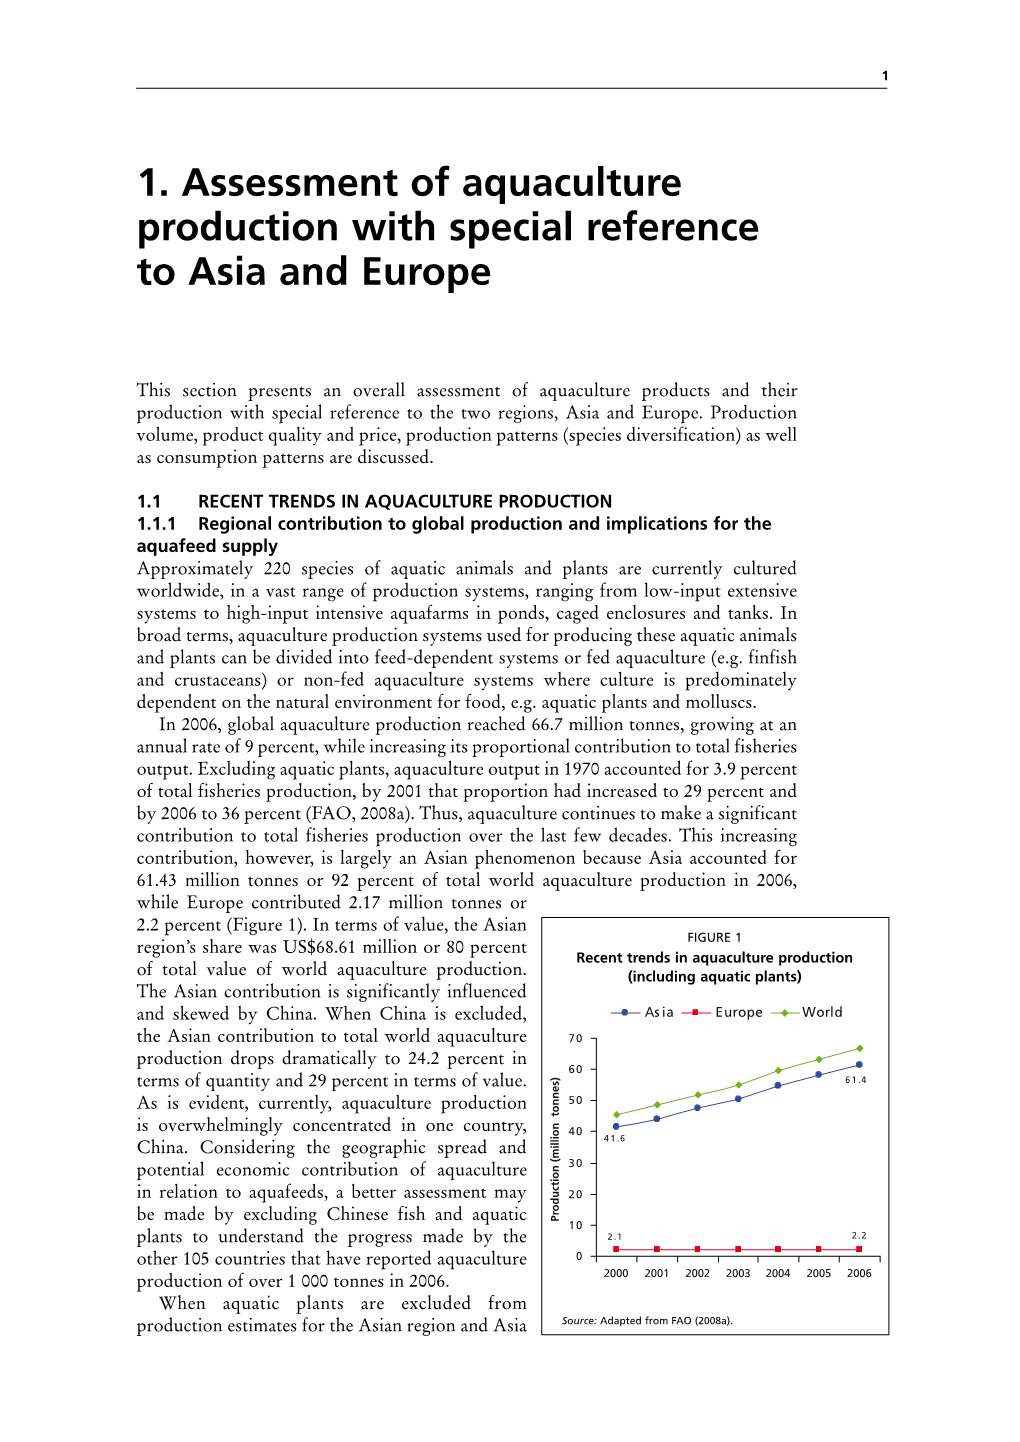 1. Assessment of Aquaculture Production with Special Reference to Asia and Europe